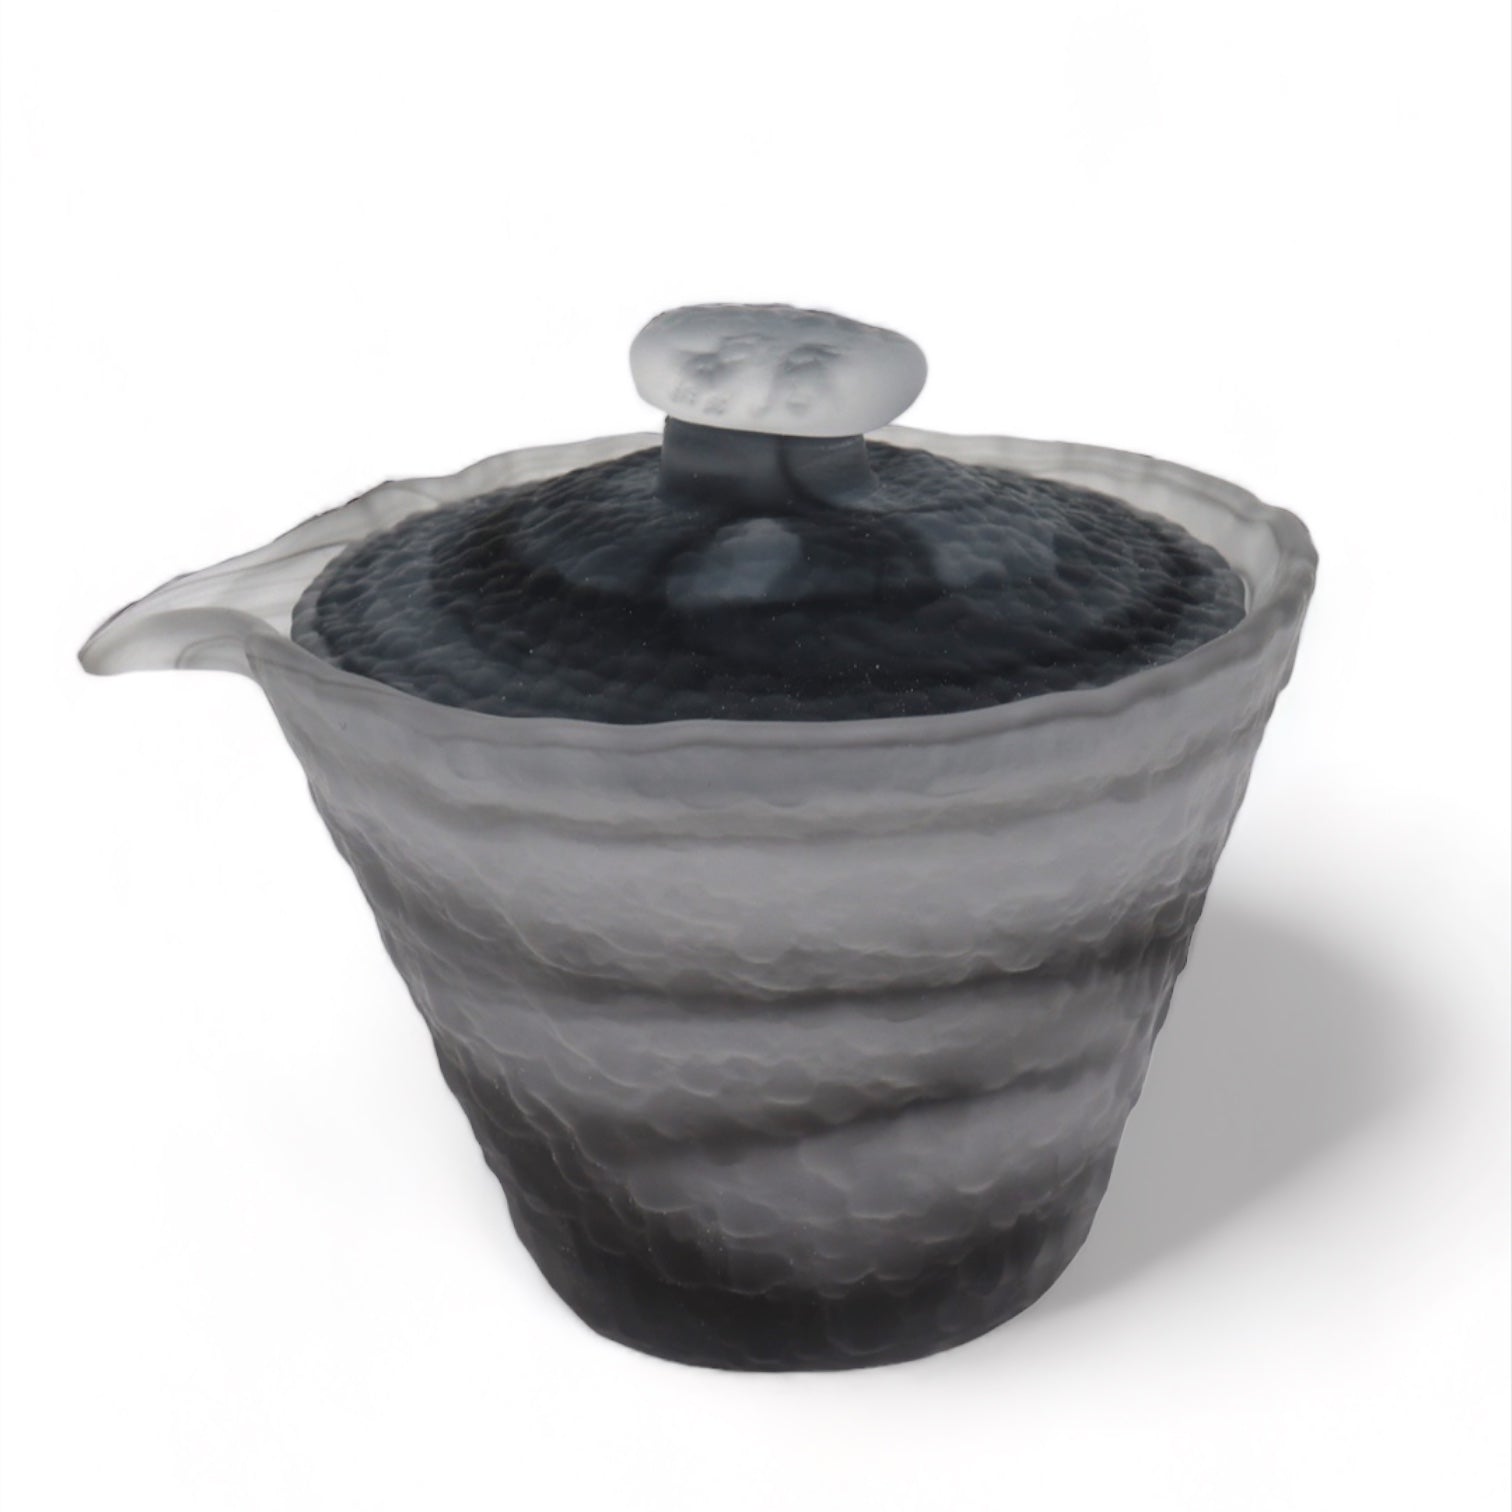 The Ethereal Mist Spouted Gaiwan